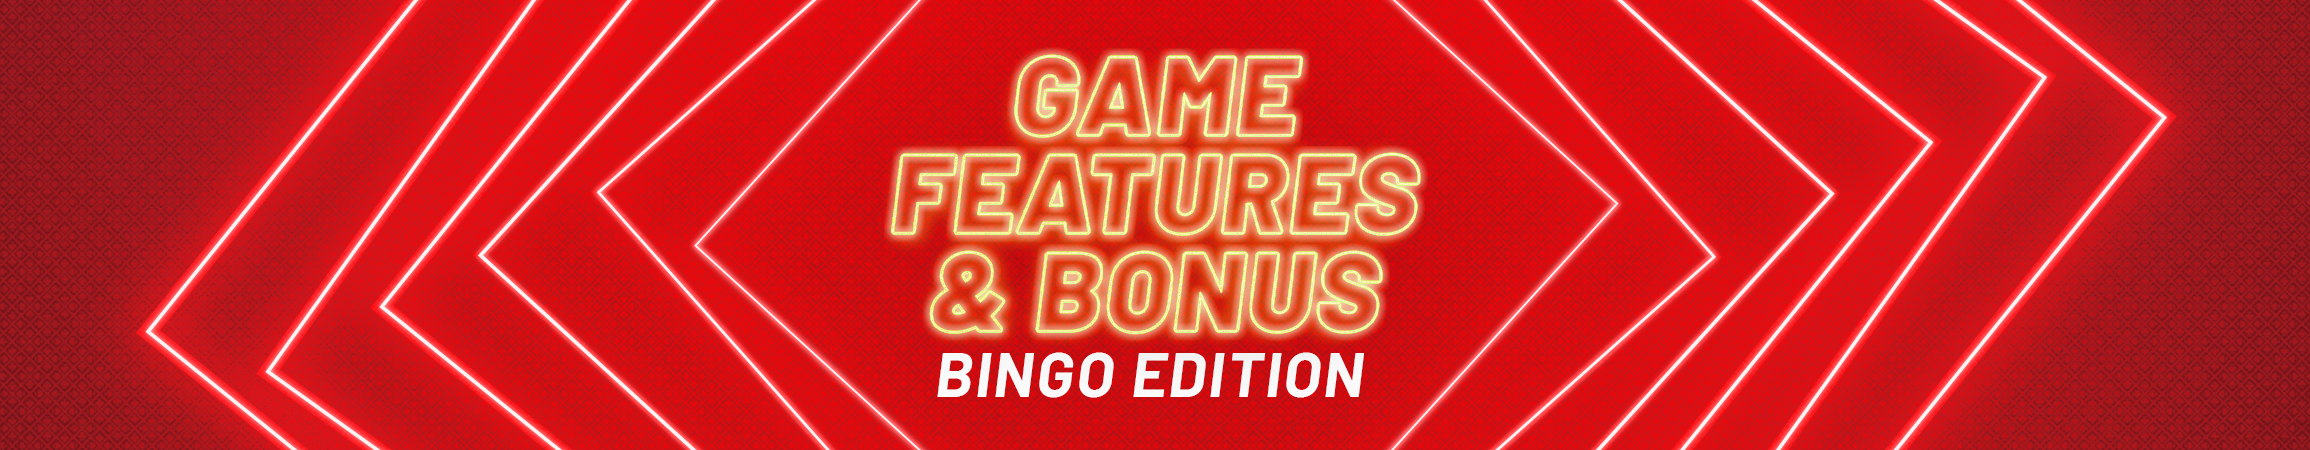 Elevating your casino experience in video bingo with FBM games